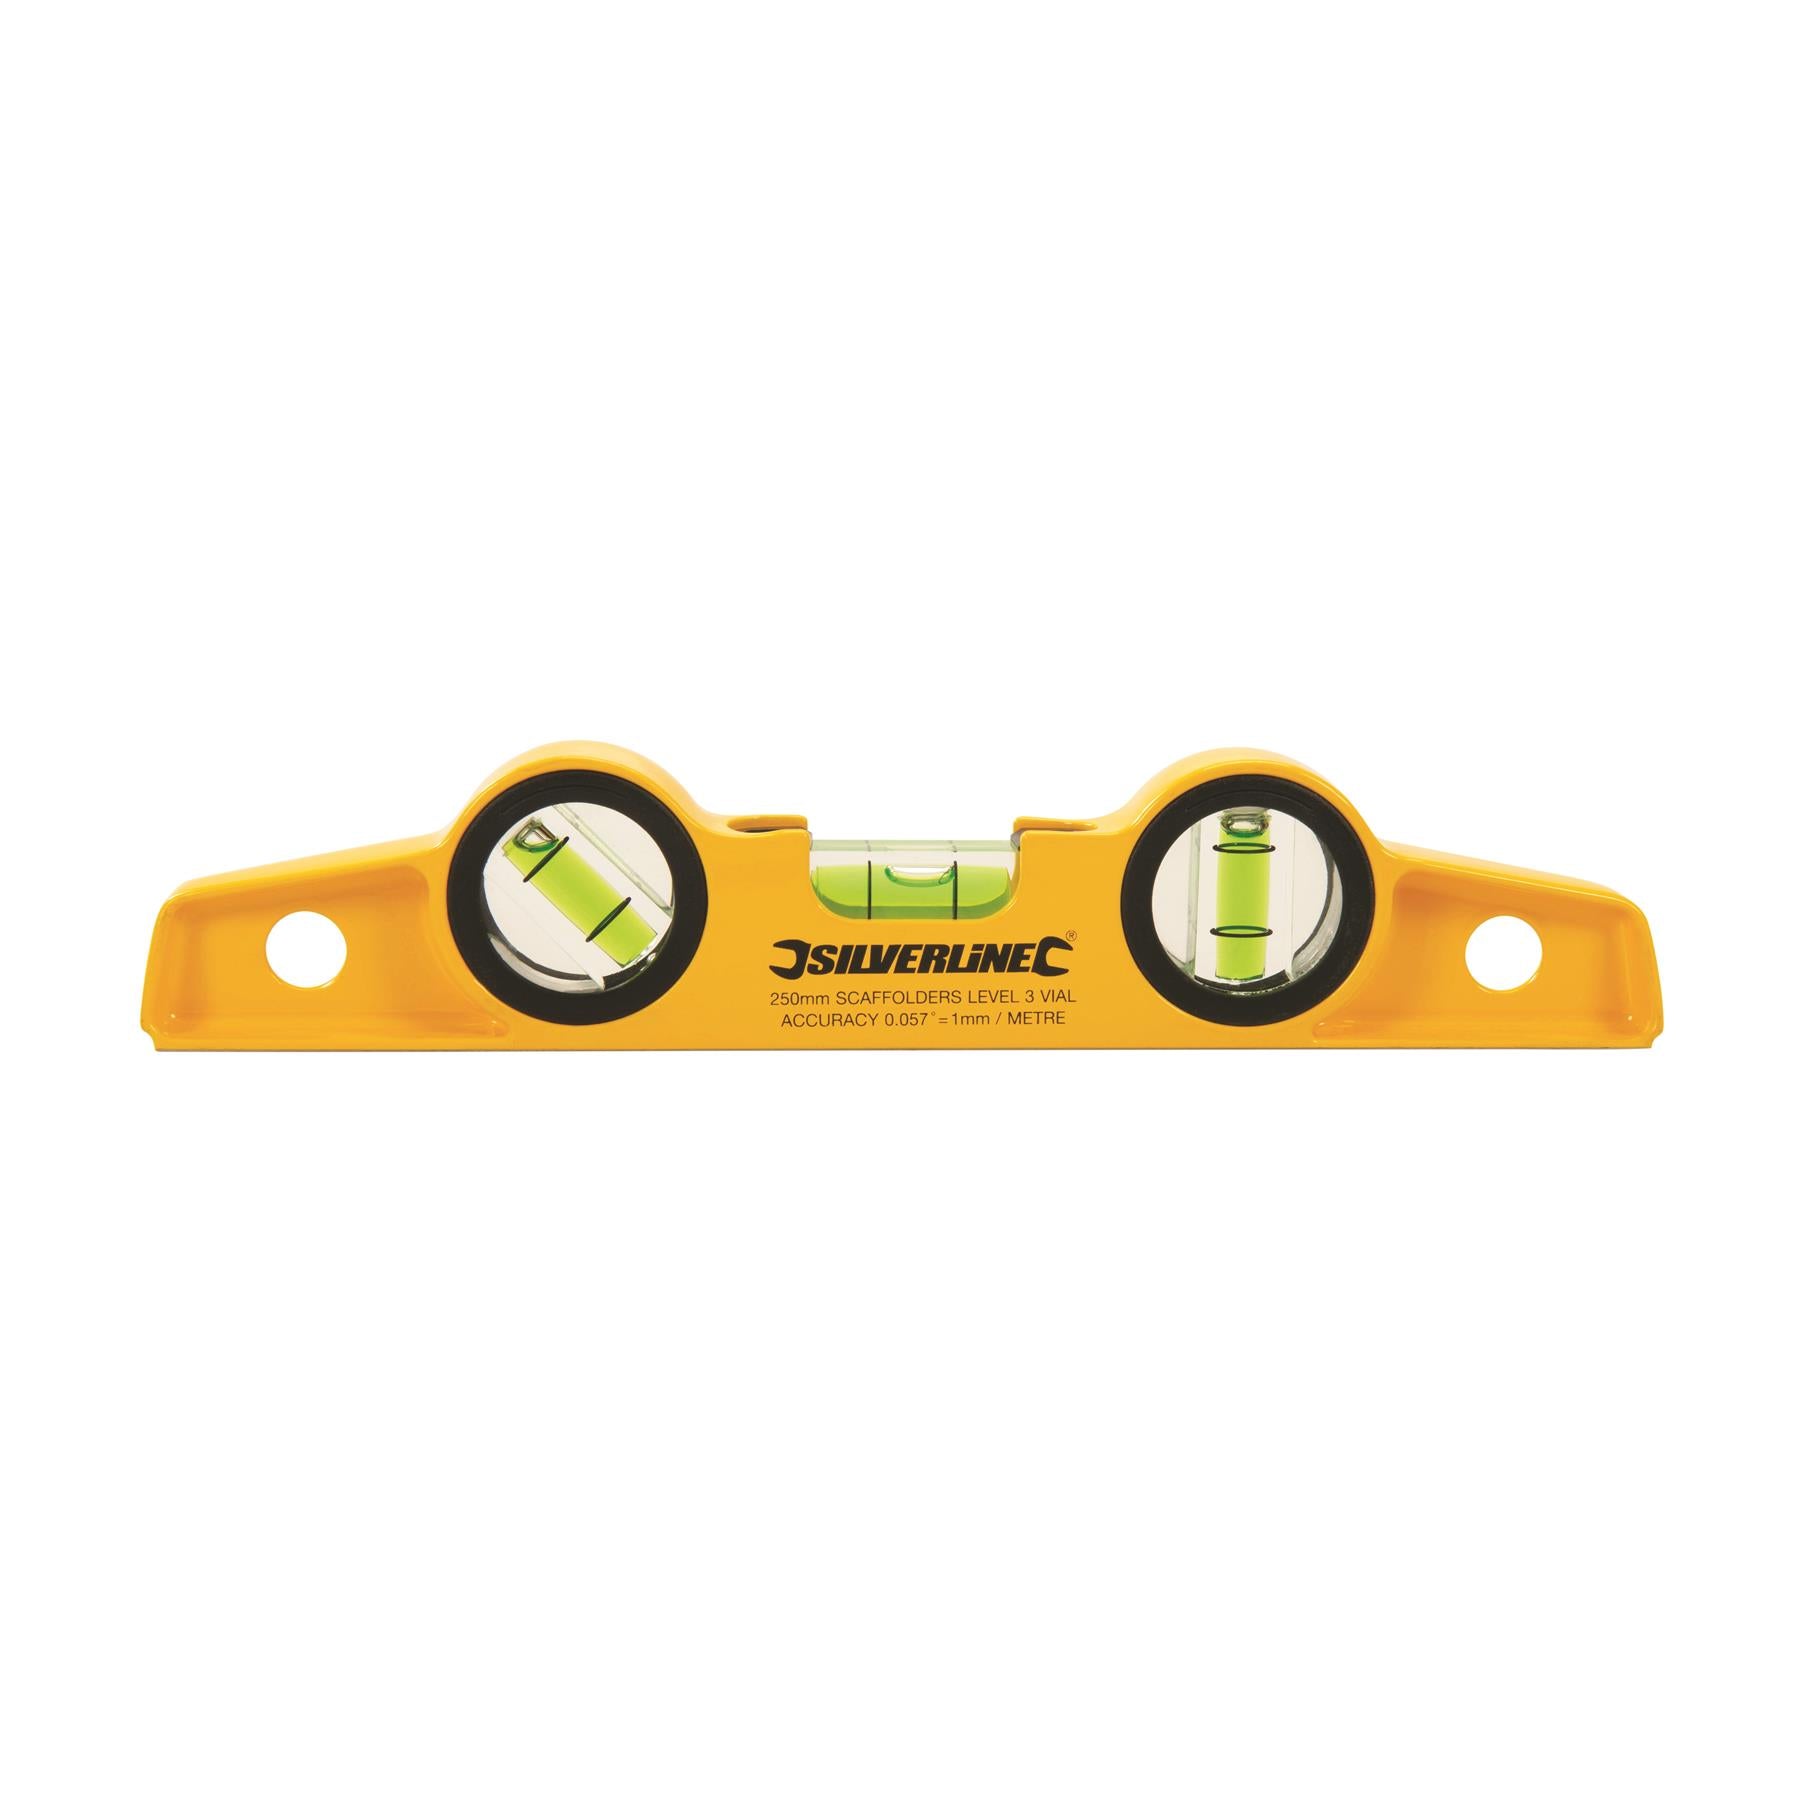 Silverline 250mm Scaffolders Spirit Level with Magnetic Base